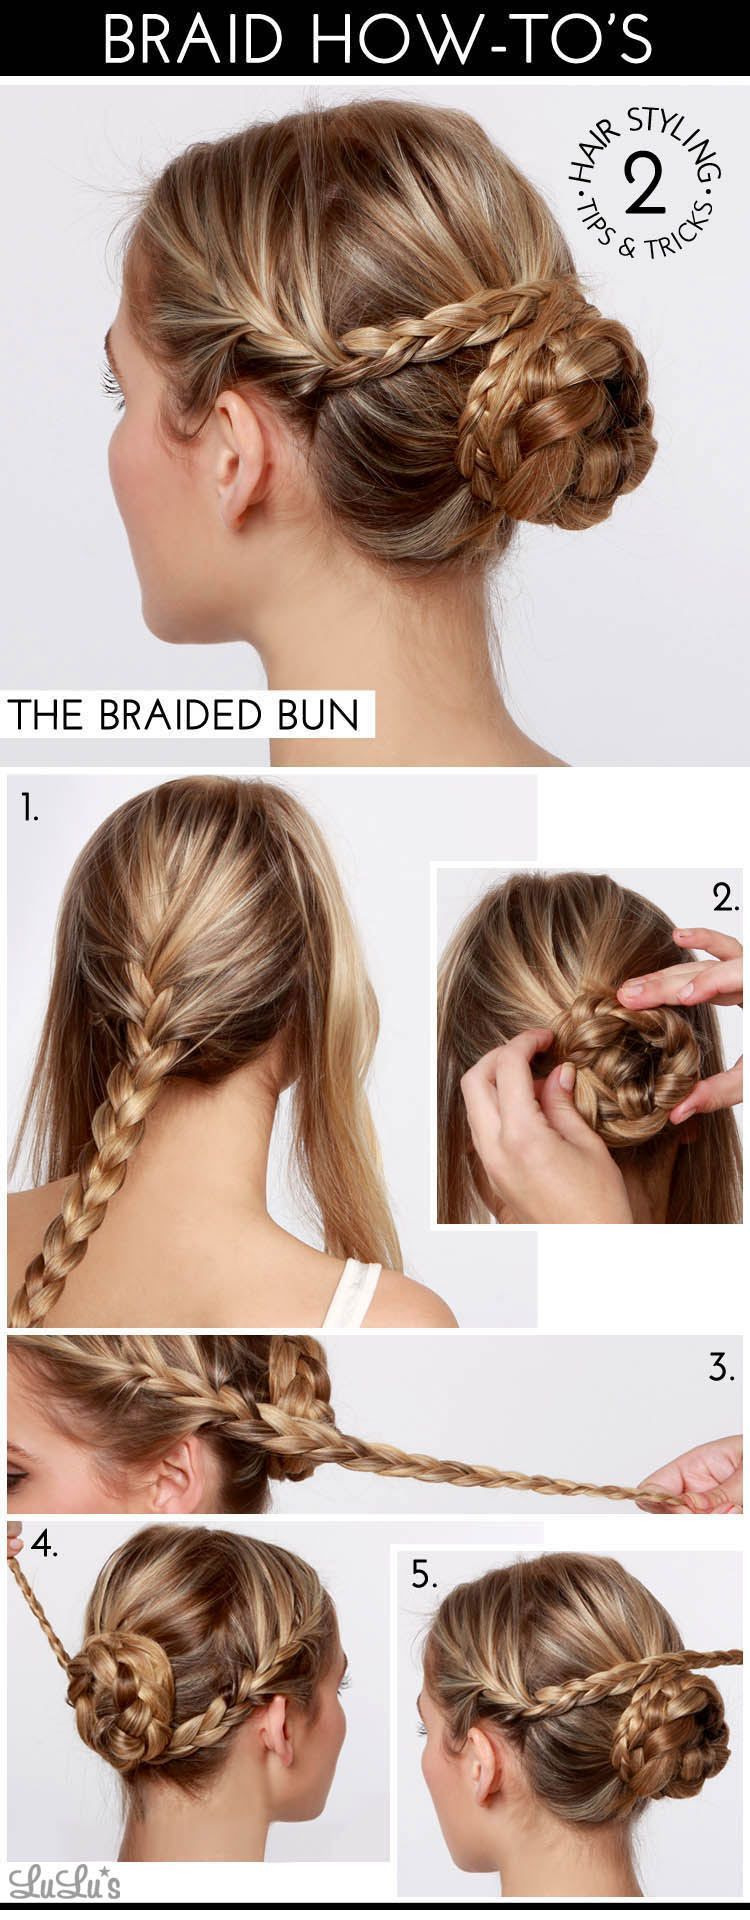 Looking for a simple and elegant way to wear braids? Check out this how-to graph